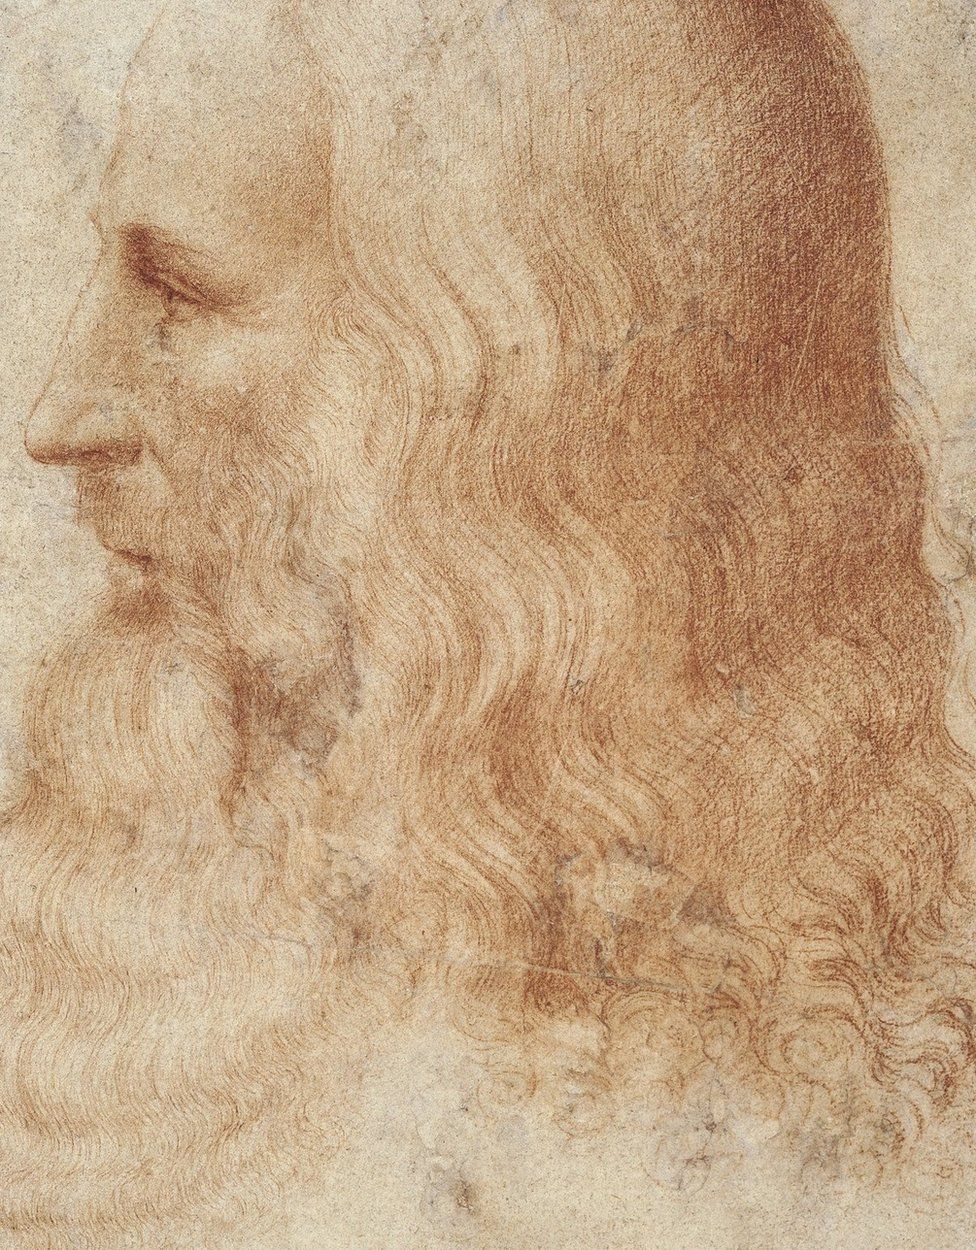 "A Portrait of Leonardo" completed by one of his students Francesco Melzi between 1515 - 1518